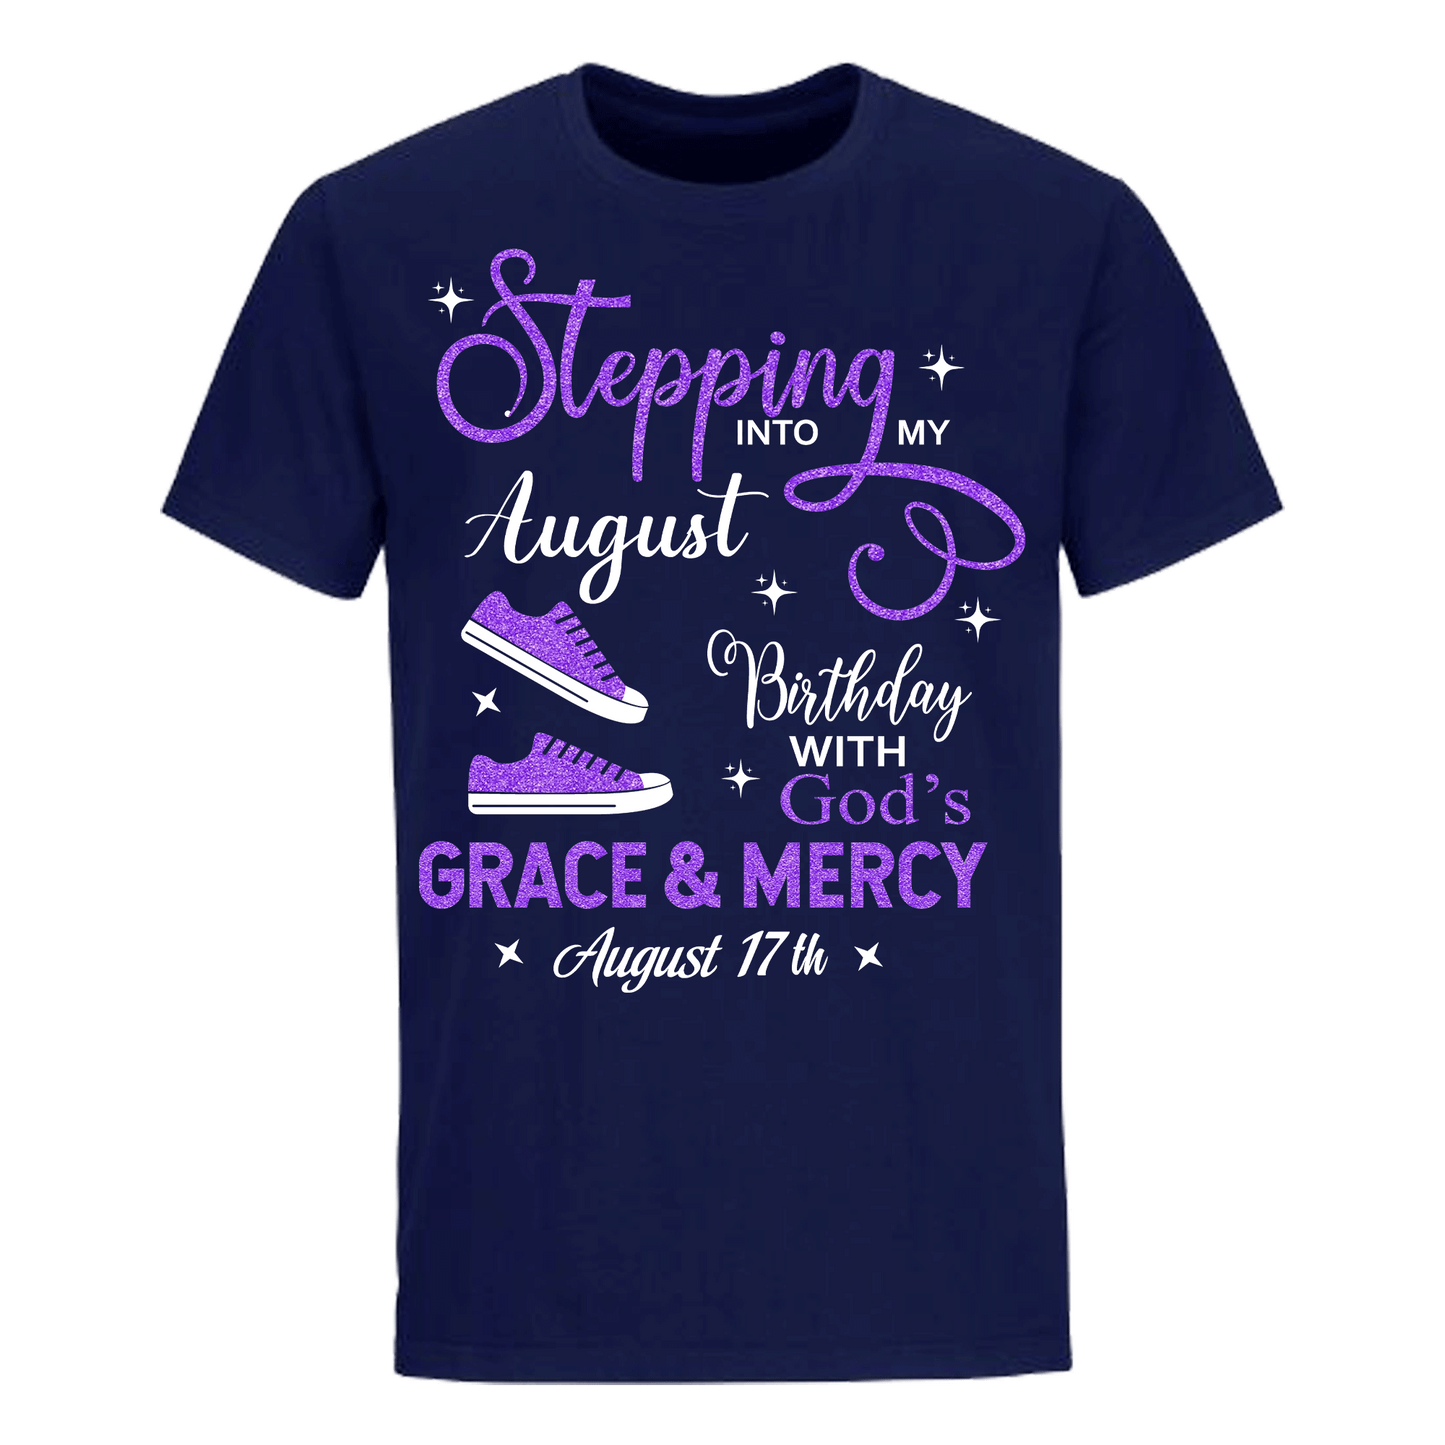 AUGUST 17 GRACE AND MERCY